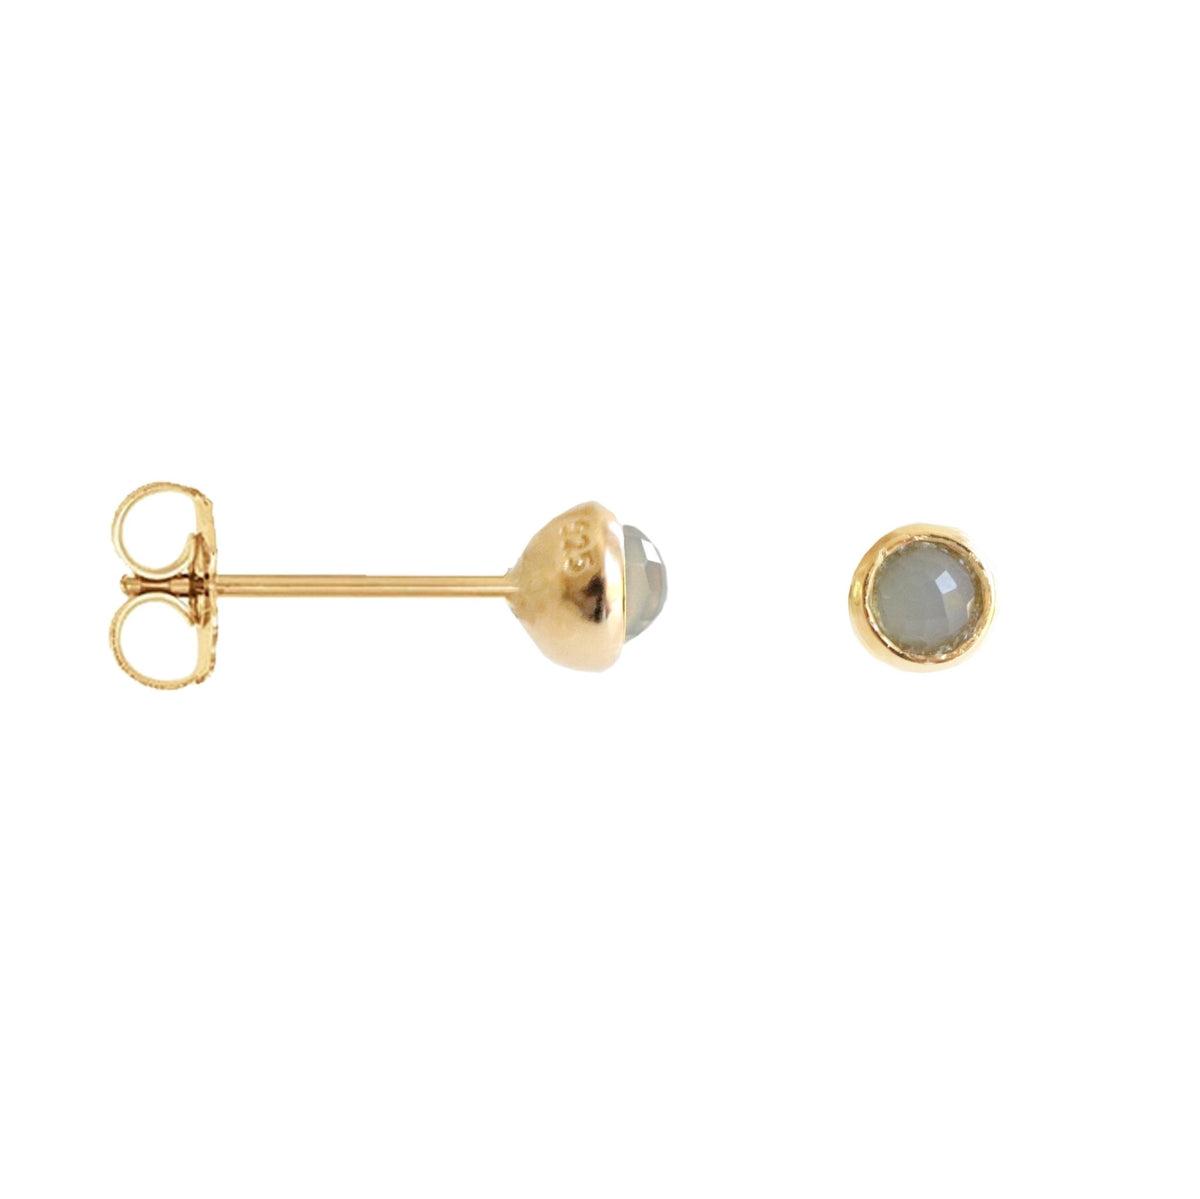 TINY PROTECT STUD EARRINGS - LABRADORITE &amp; GOLD - SO PRETTY CARA COTTER